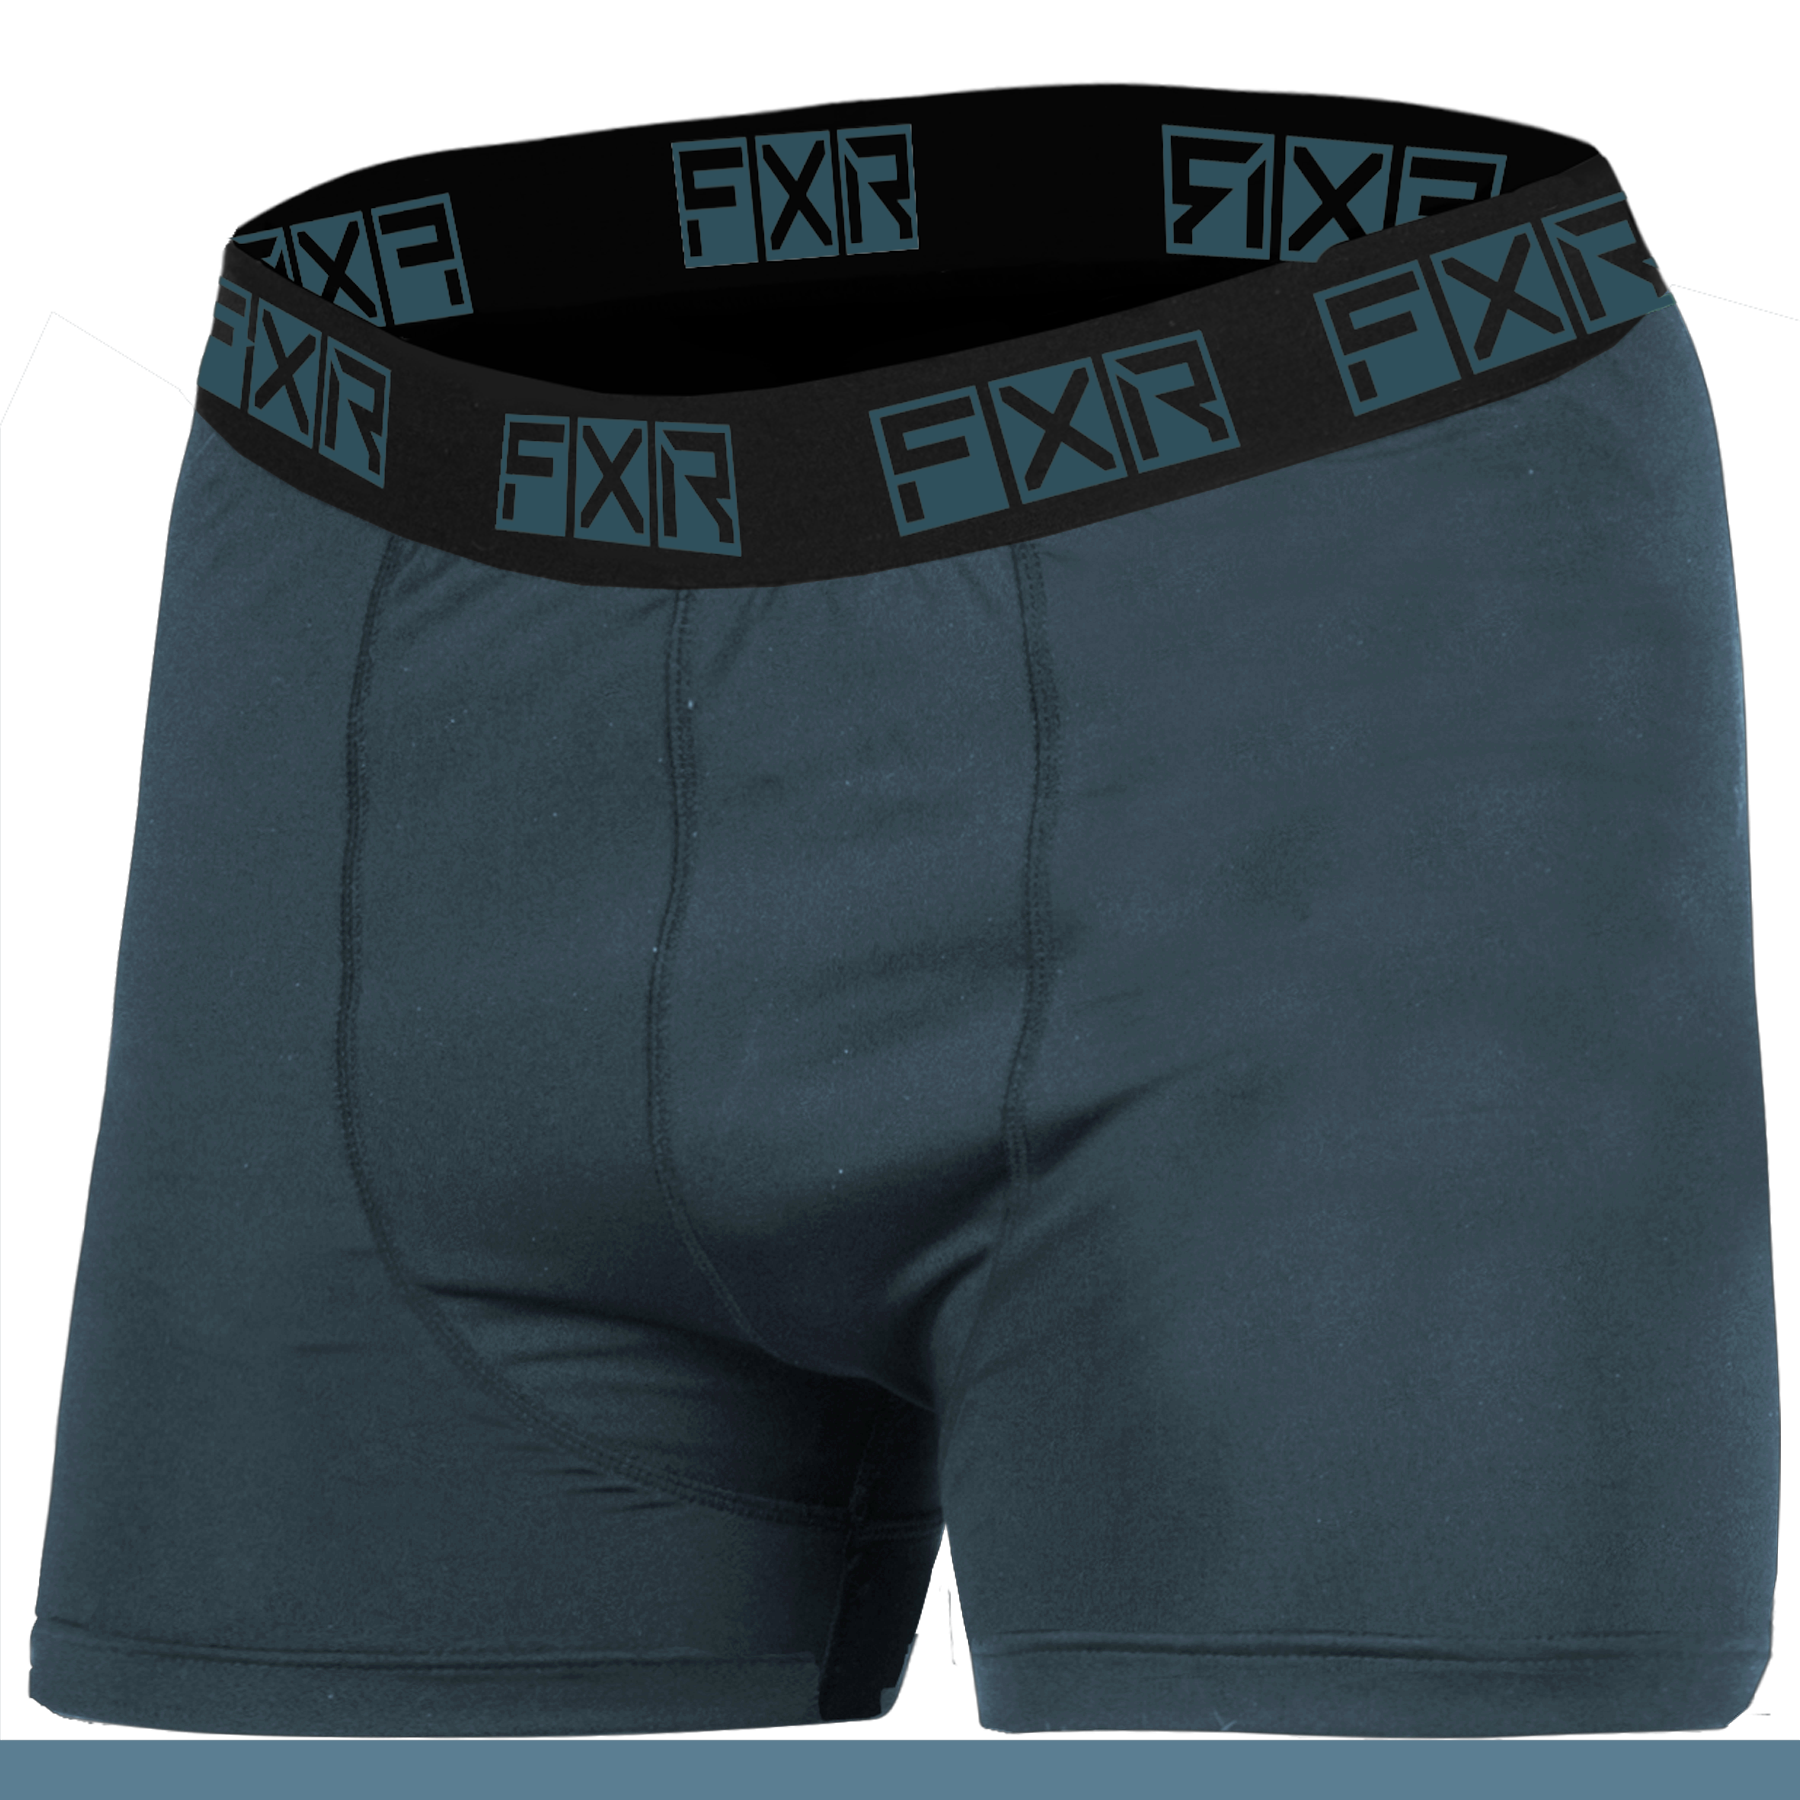 fxr racing baselayers  atmosphere boxer brief bottoms - snowmobile